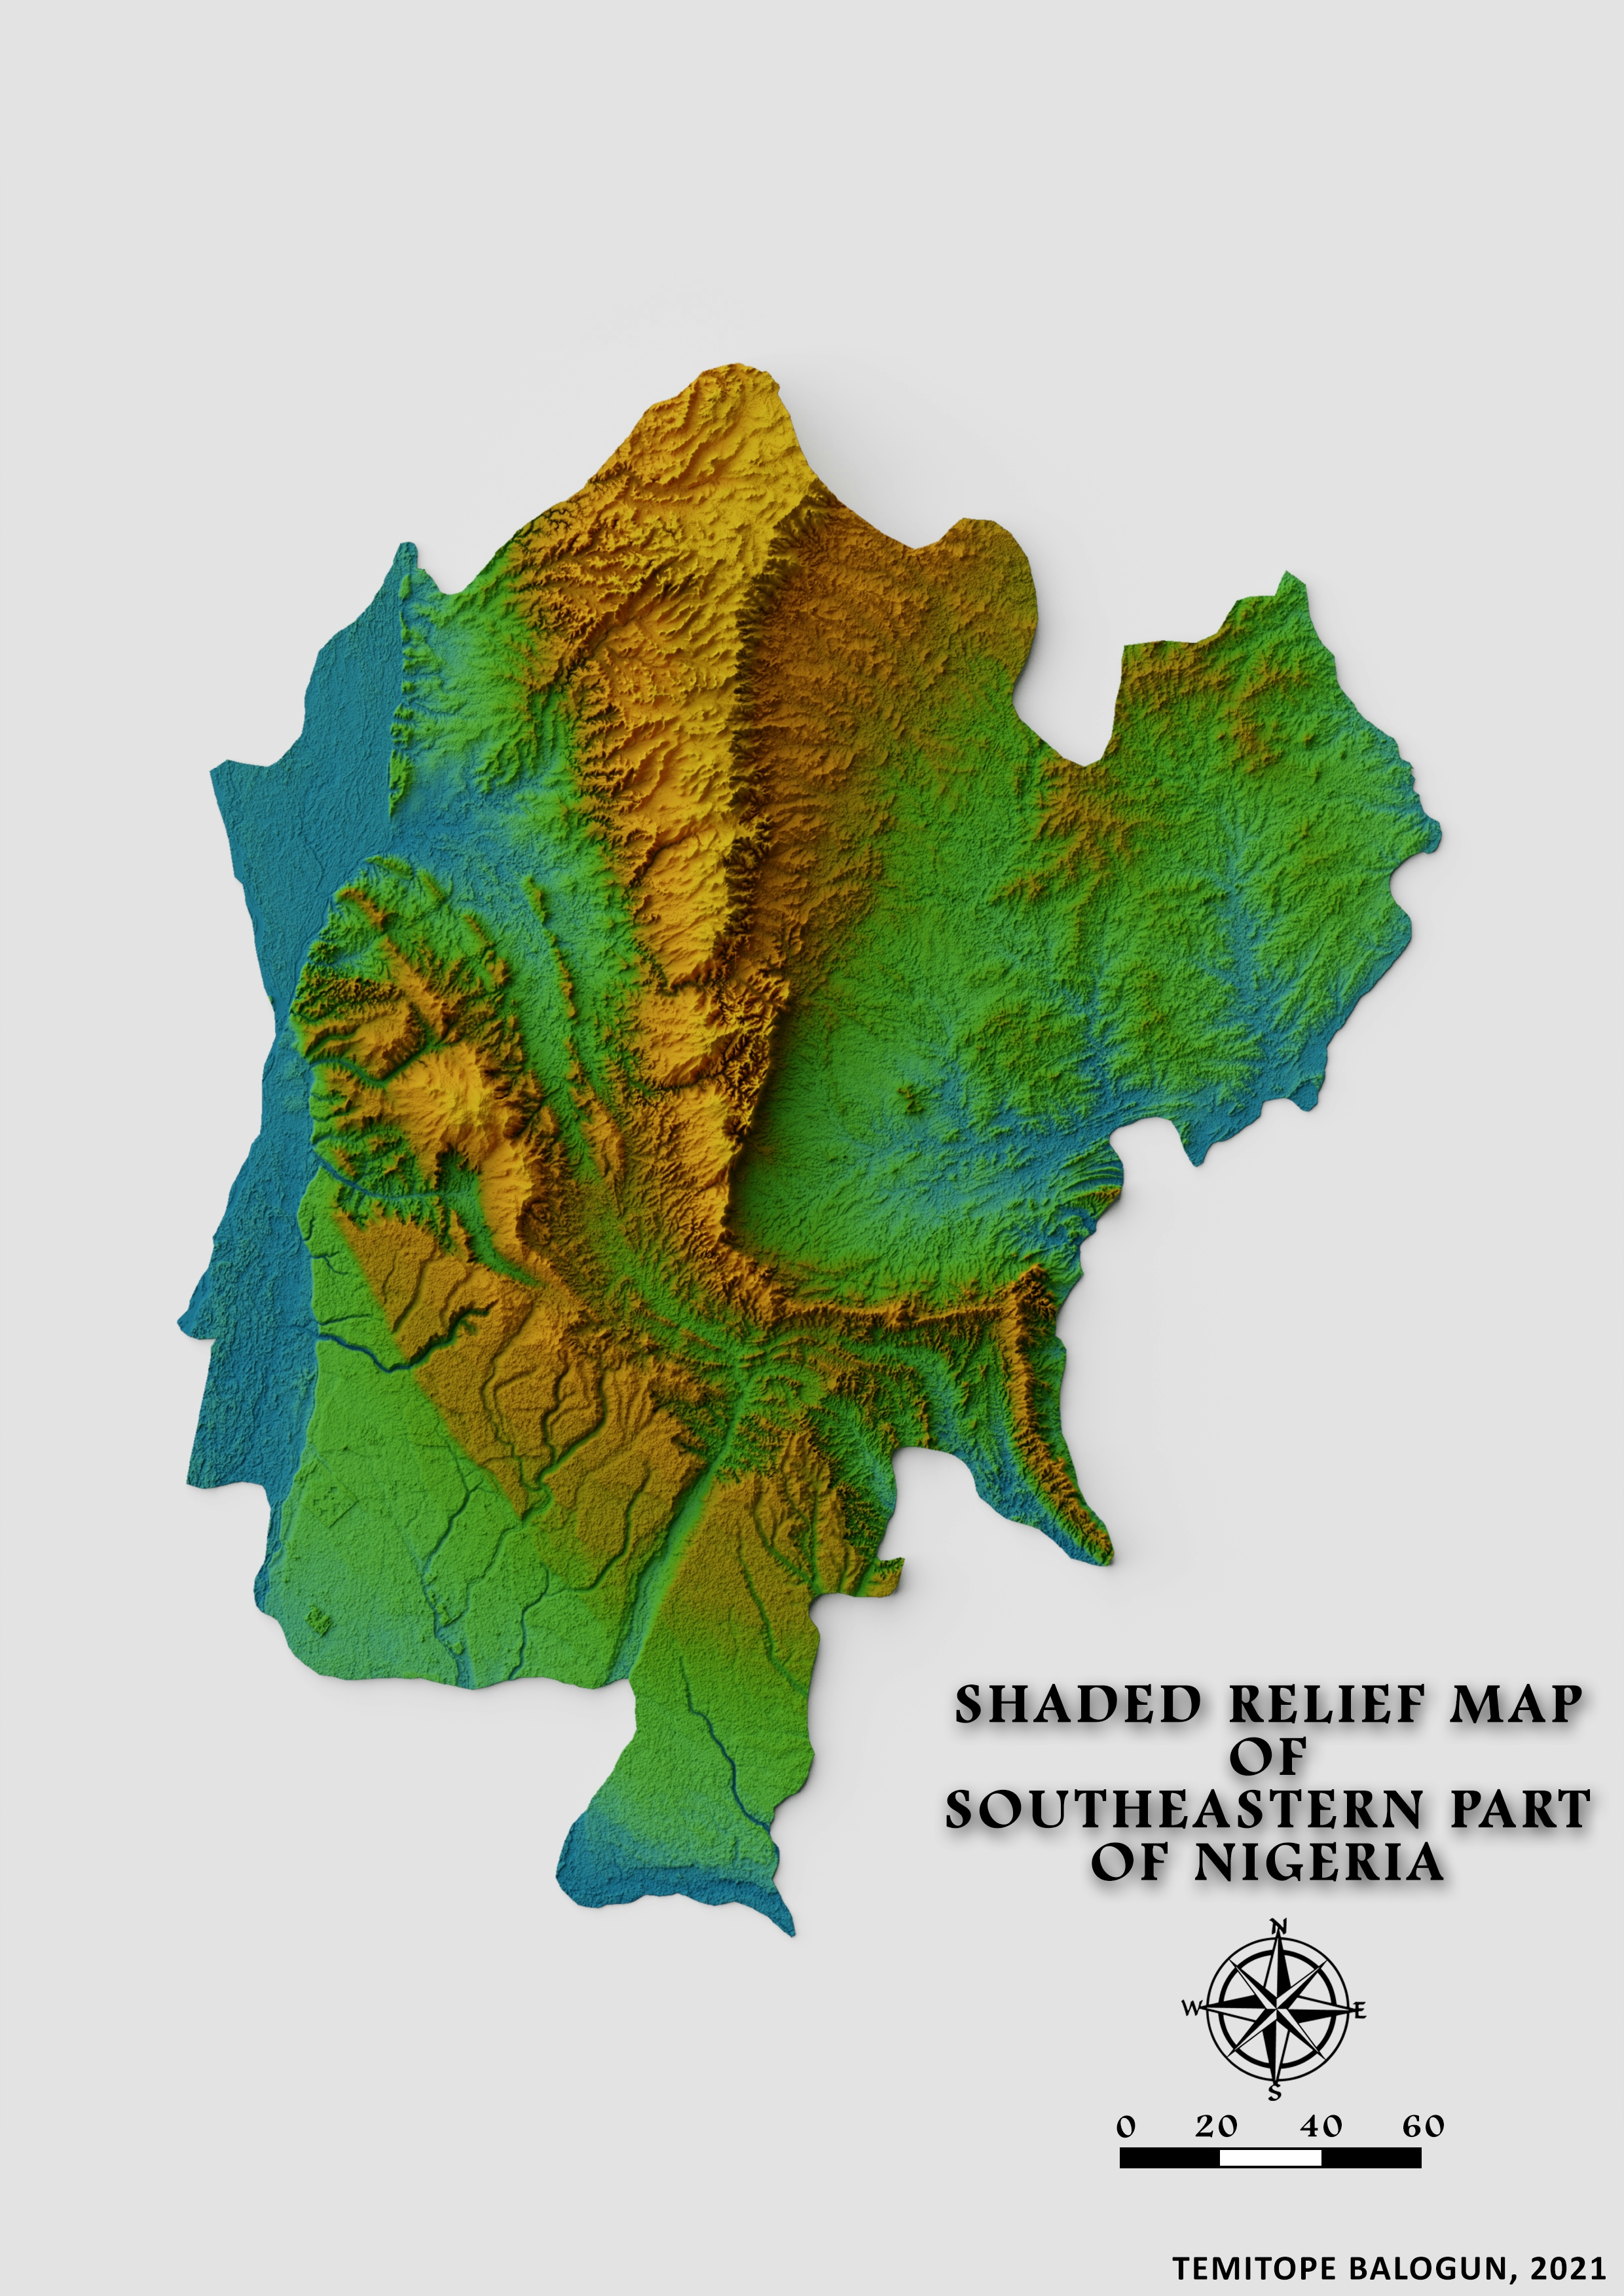 Shaded relief map of Southeastern part of Nigeria